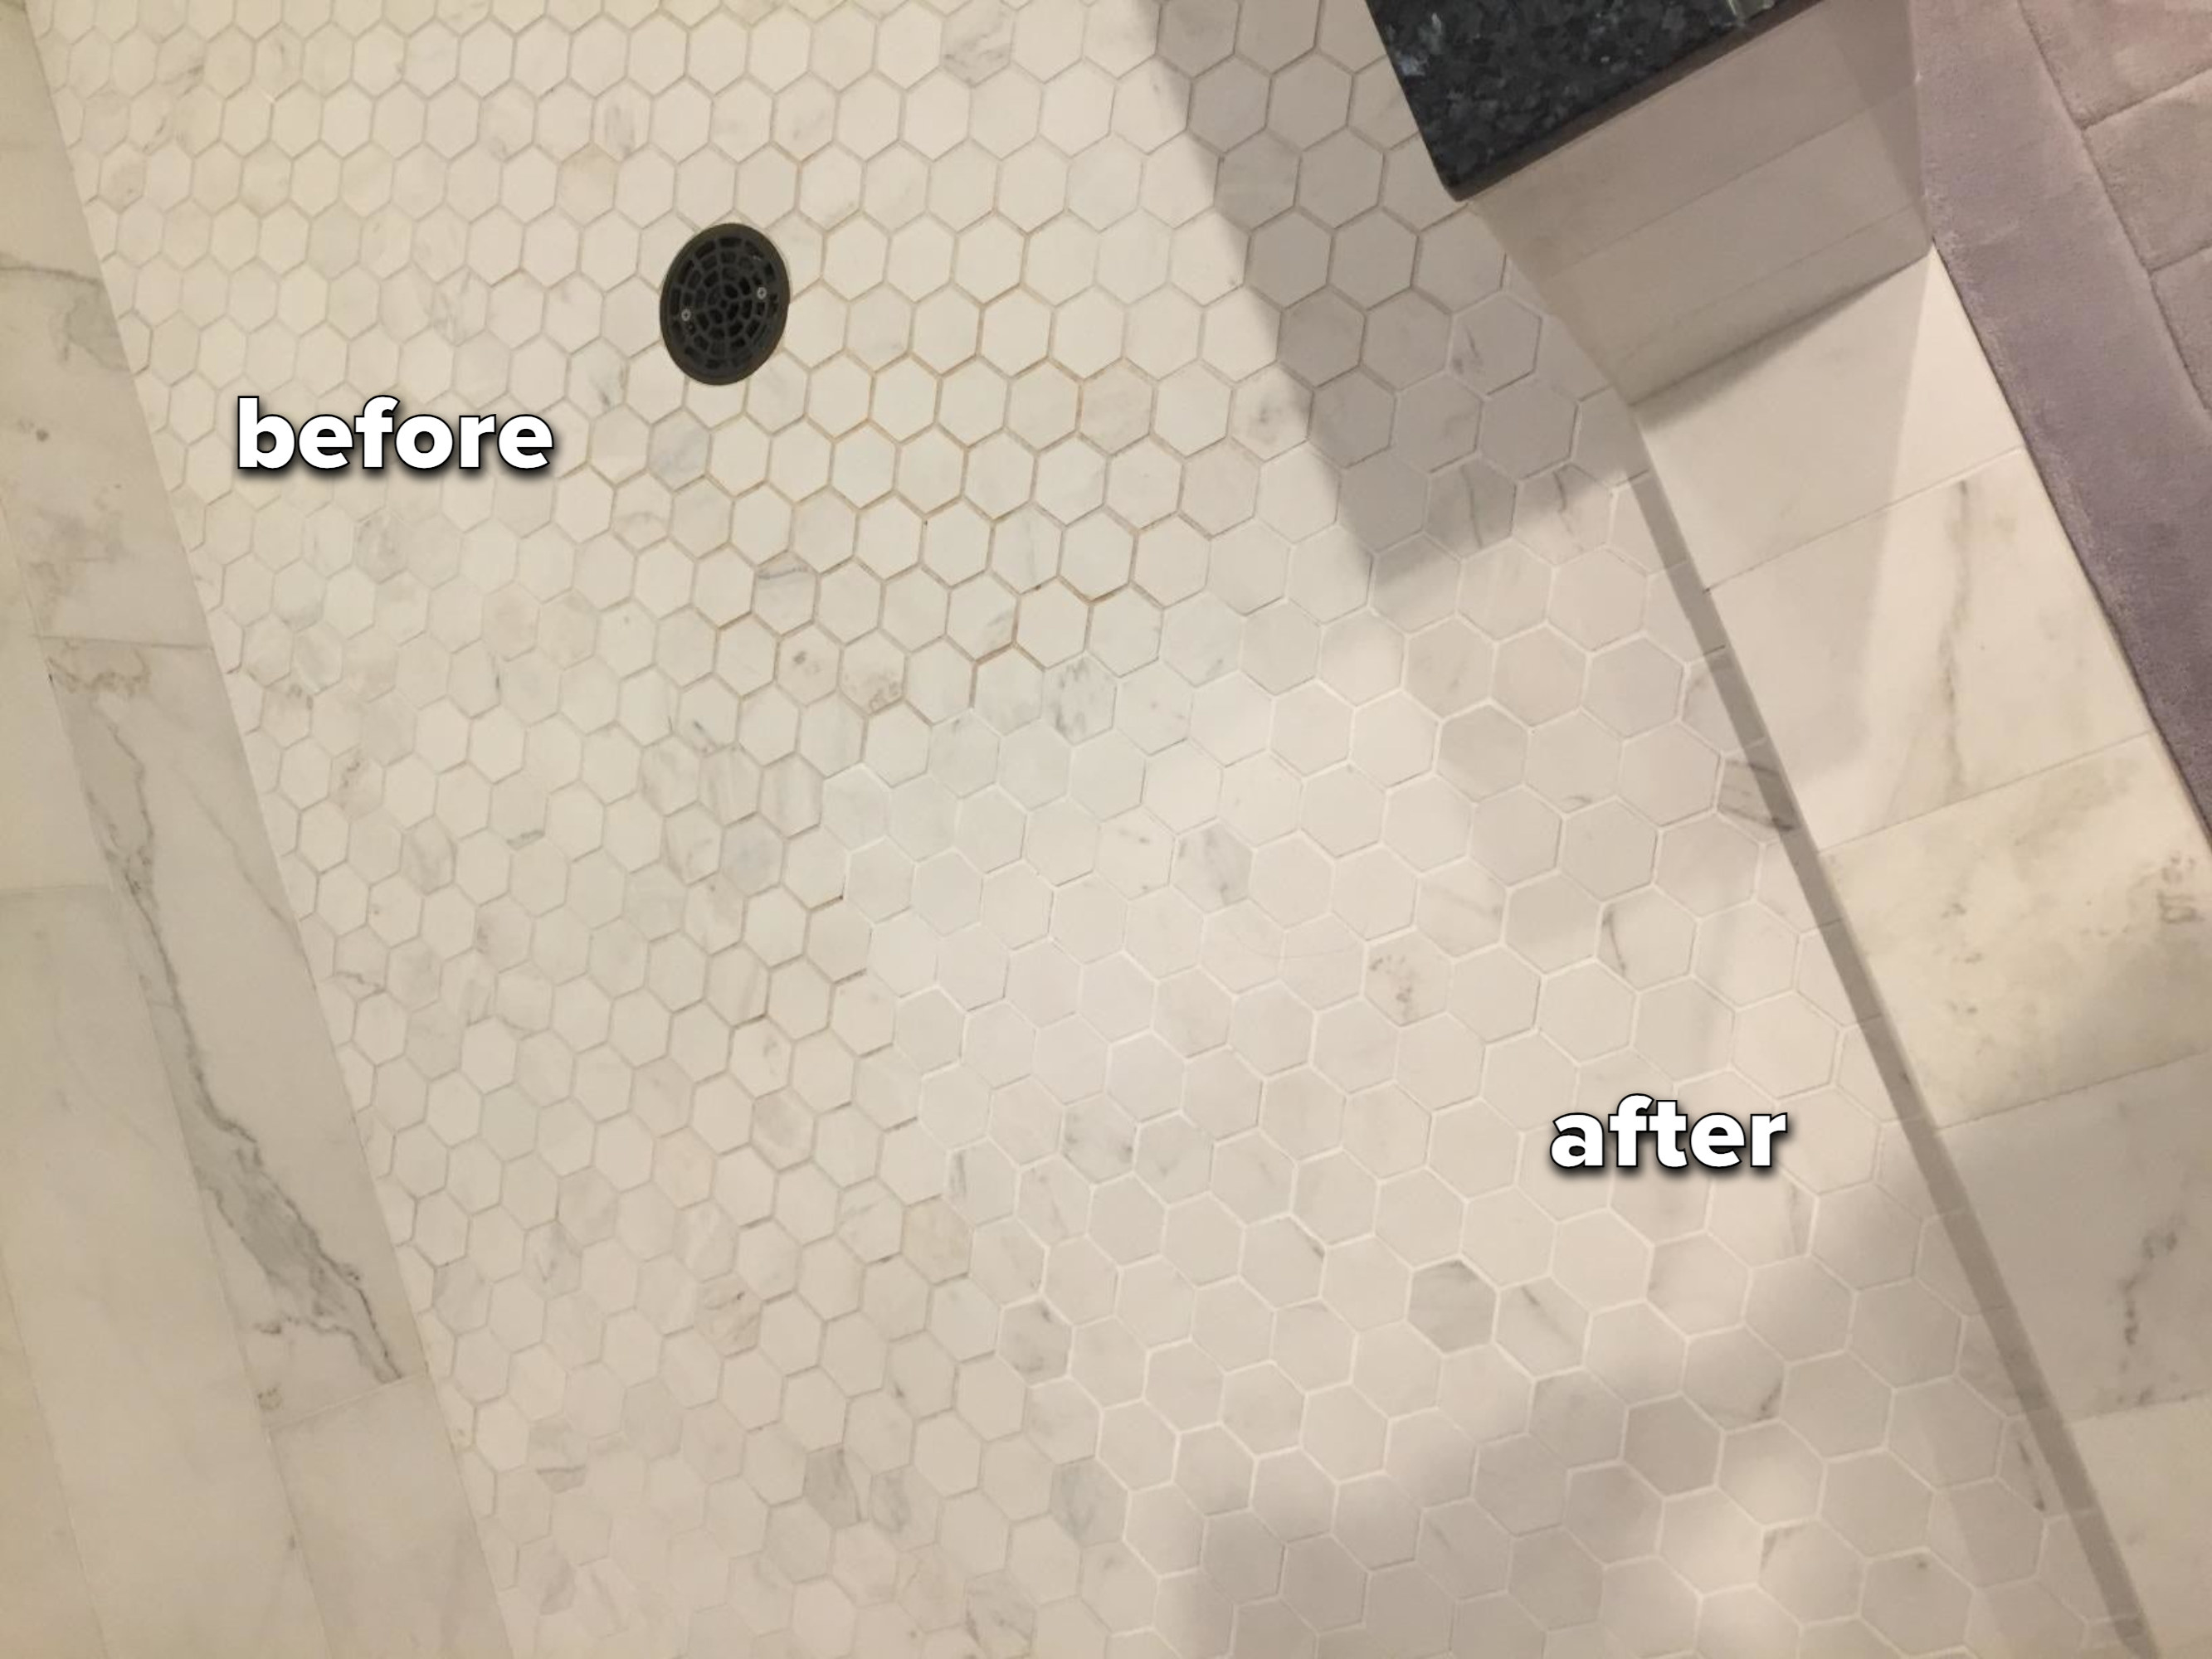 reviewer&#x27;s bathroom tiles showing white grout next to unpainted, brown grout